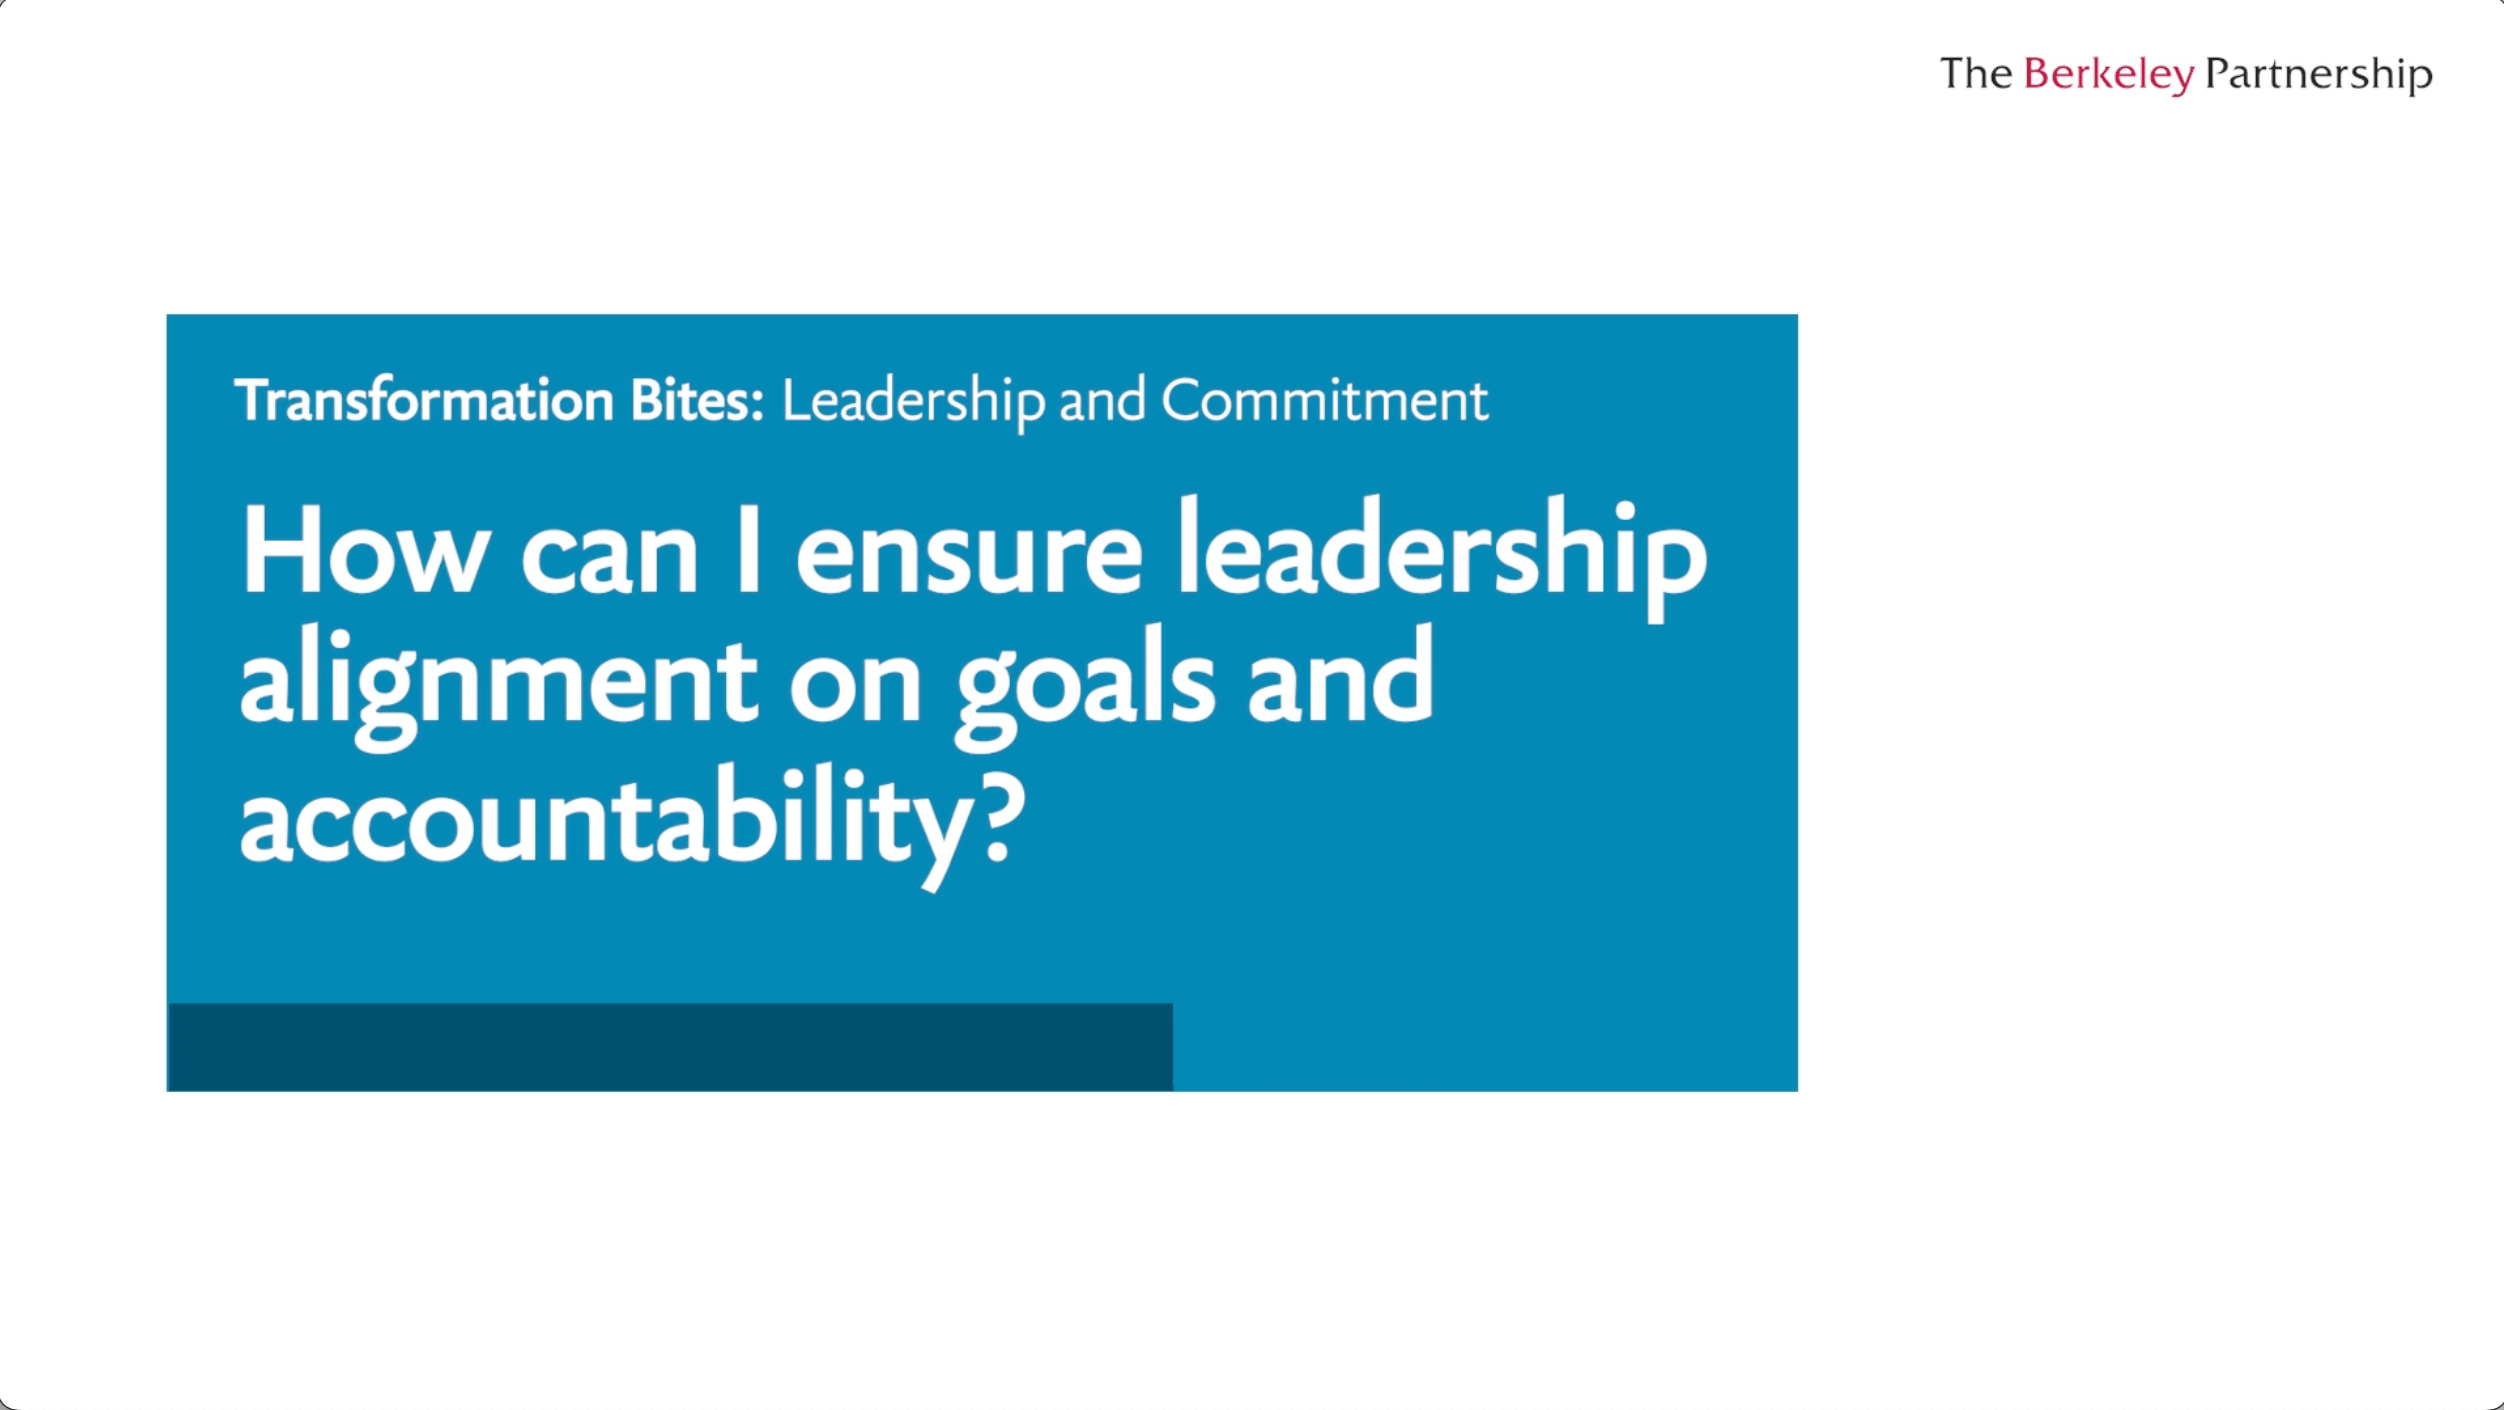 How can I ensure leadership alignment on goals and accountability?